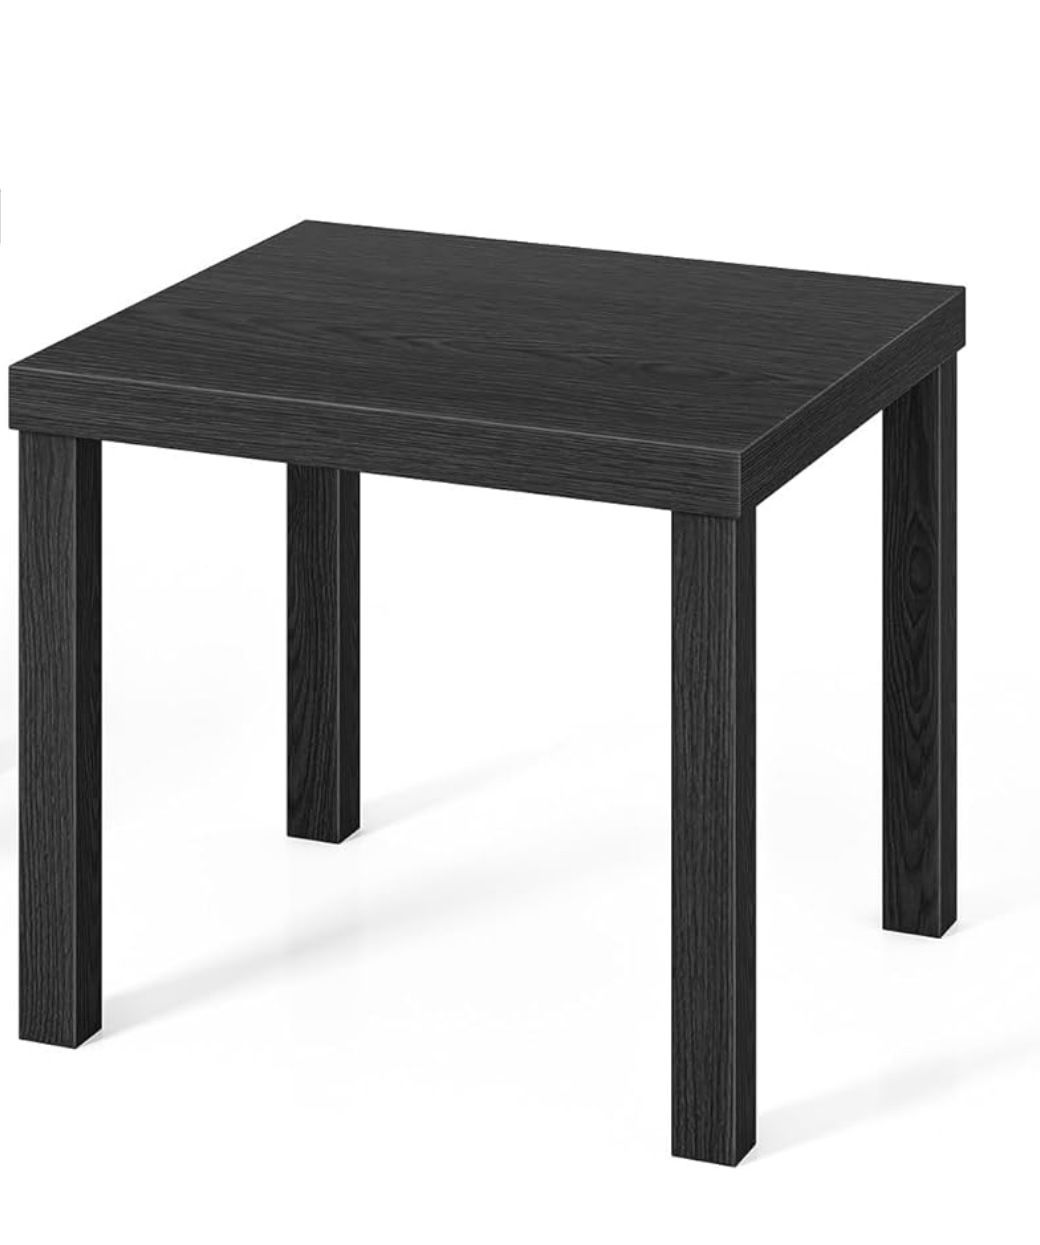 End Table / Small Square Side Table/ New